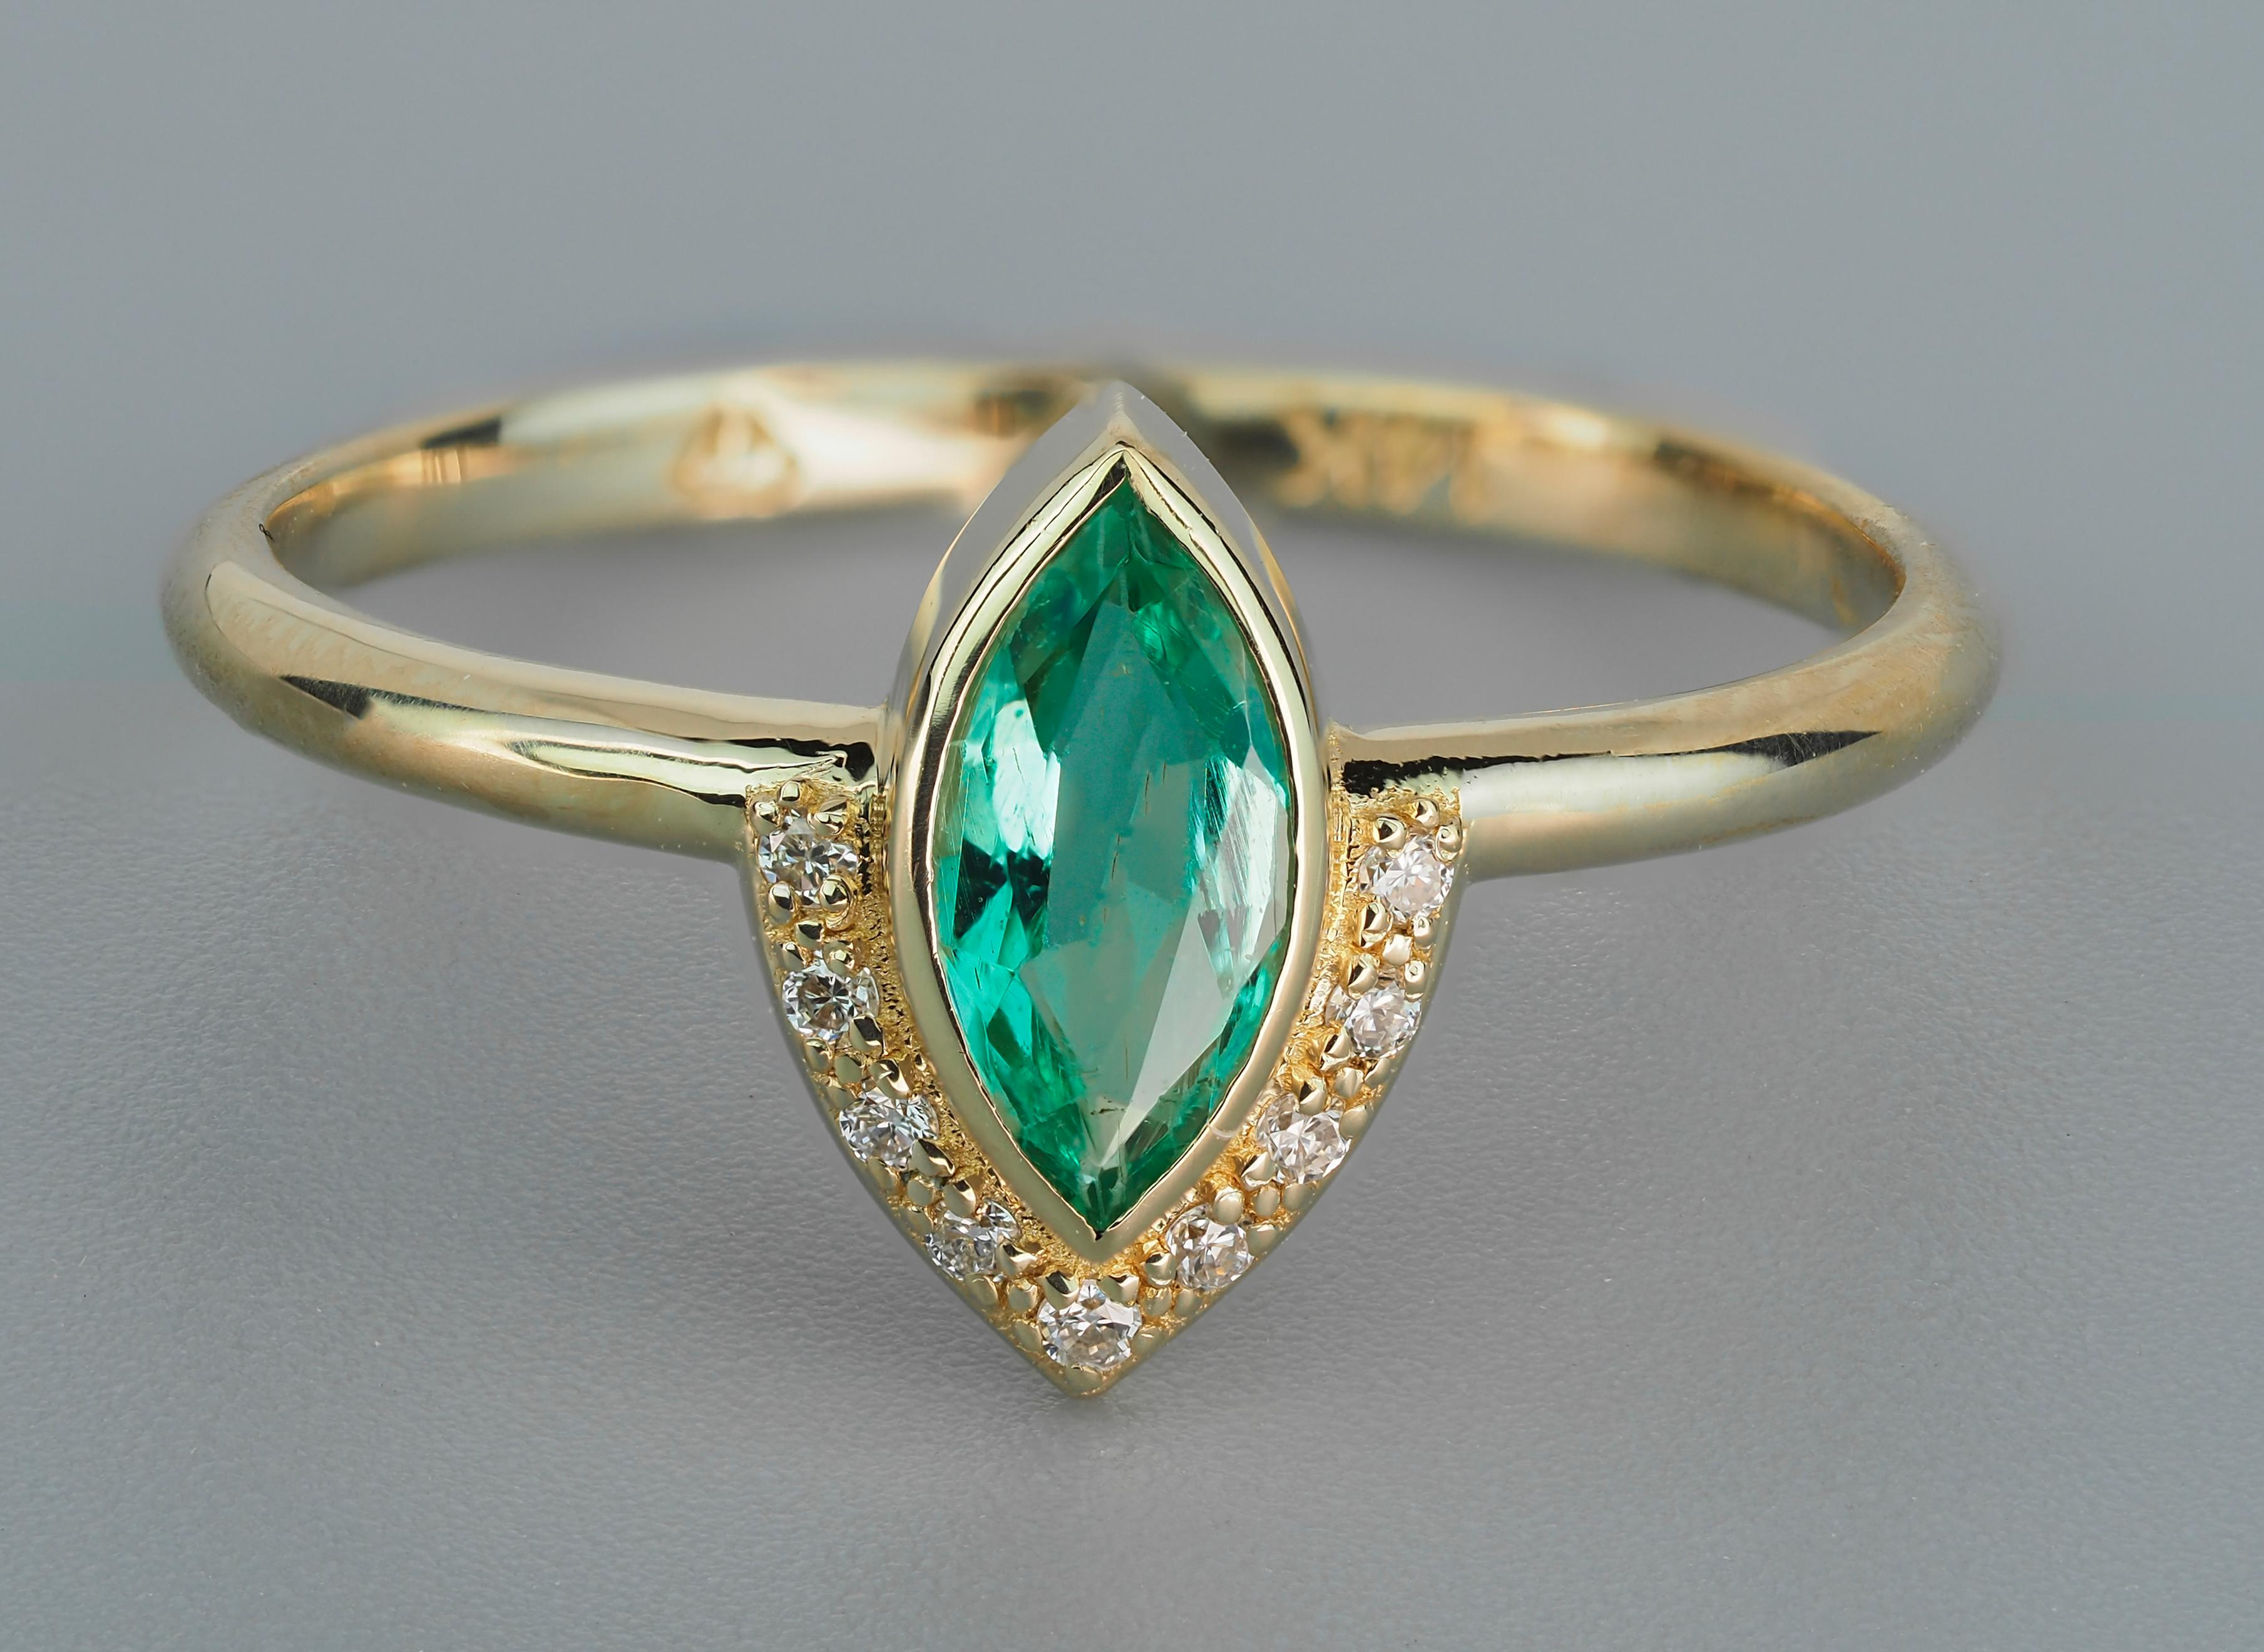 14 kt  gold ring with emerald and diamonds.
Total weight: 1.80 g.

Set with emerald, color - green
Marquise cut, 0.70 ct. in total.
Clarity: Transparent with inclusions
Surrounding stone - diamonds 0.09 ct (9 x 0.01 ct), F/VS, round brilliant cut.
